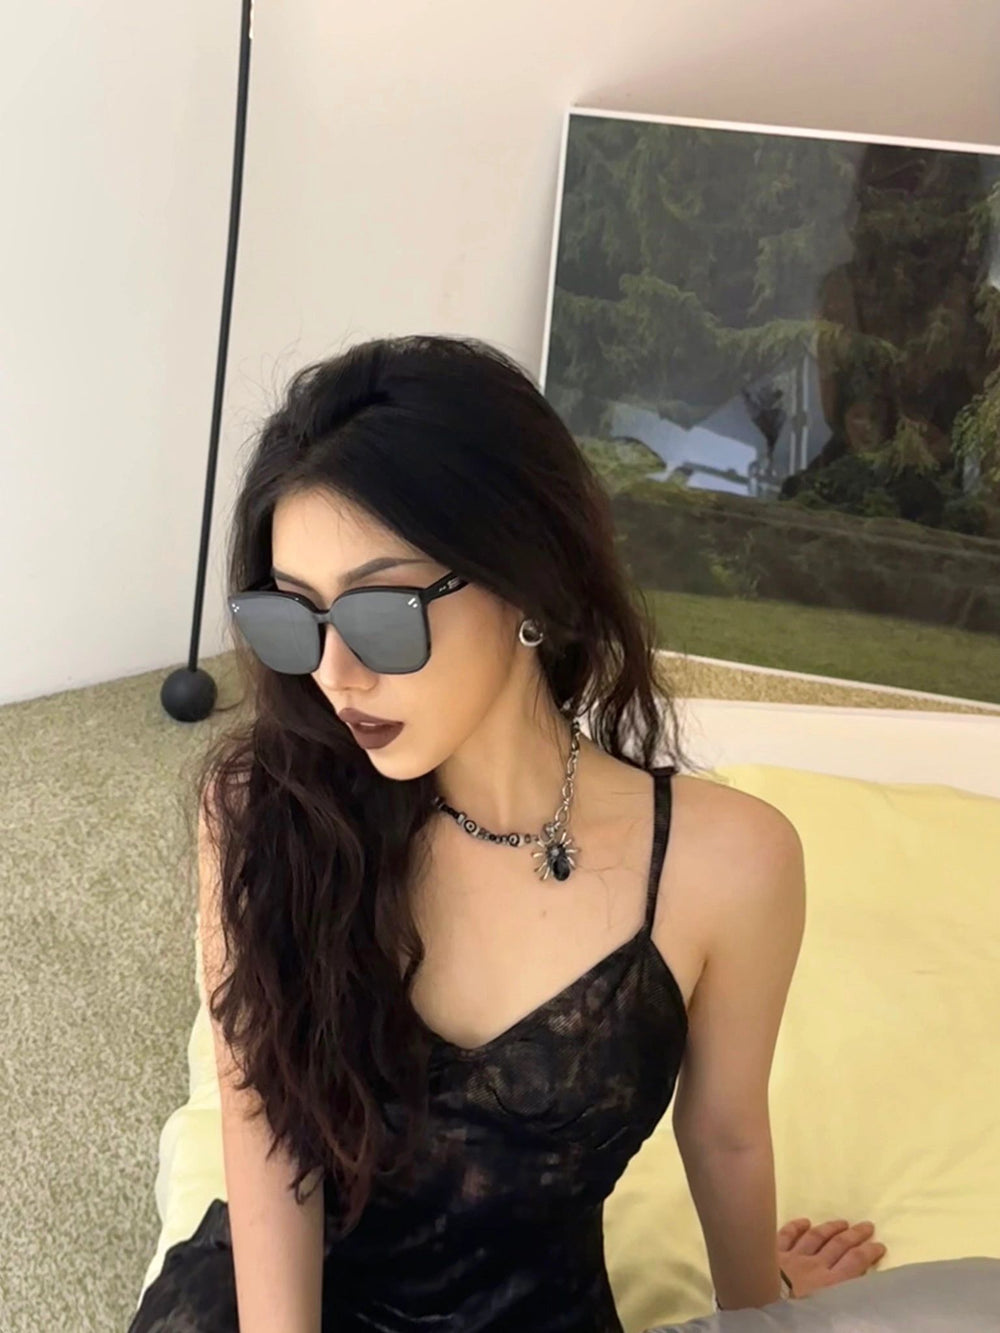 With an air of refined charm, a woman in a chic black dress sits gracefully on a luxurious bed, epitomizing sophistication and grace with her fashionable sunglasses.